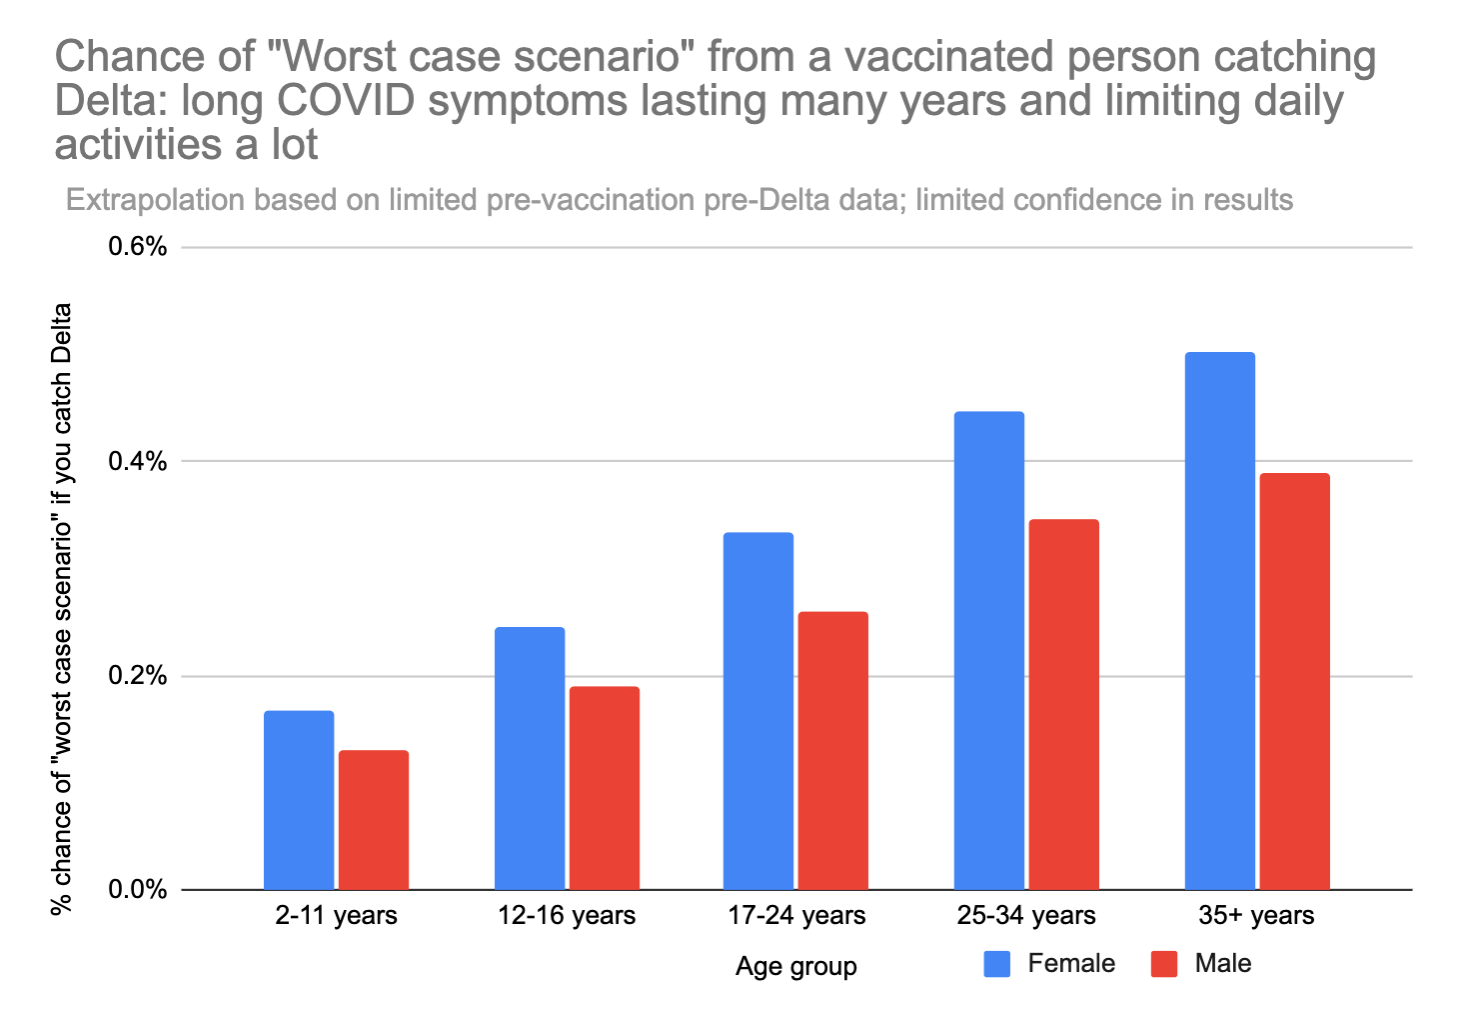 If you’re vaccinated, your main risk from the Delta variant is probably long-haul COVID (Updated 8/11/21)